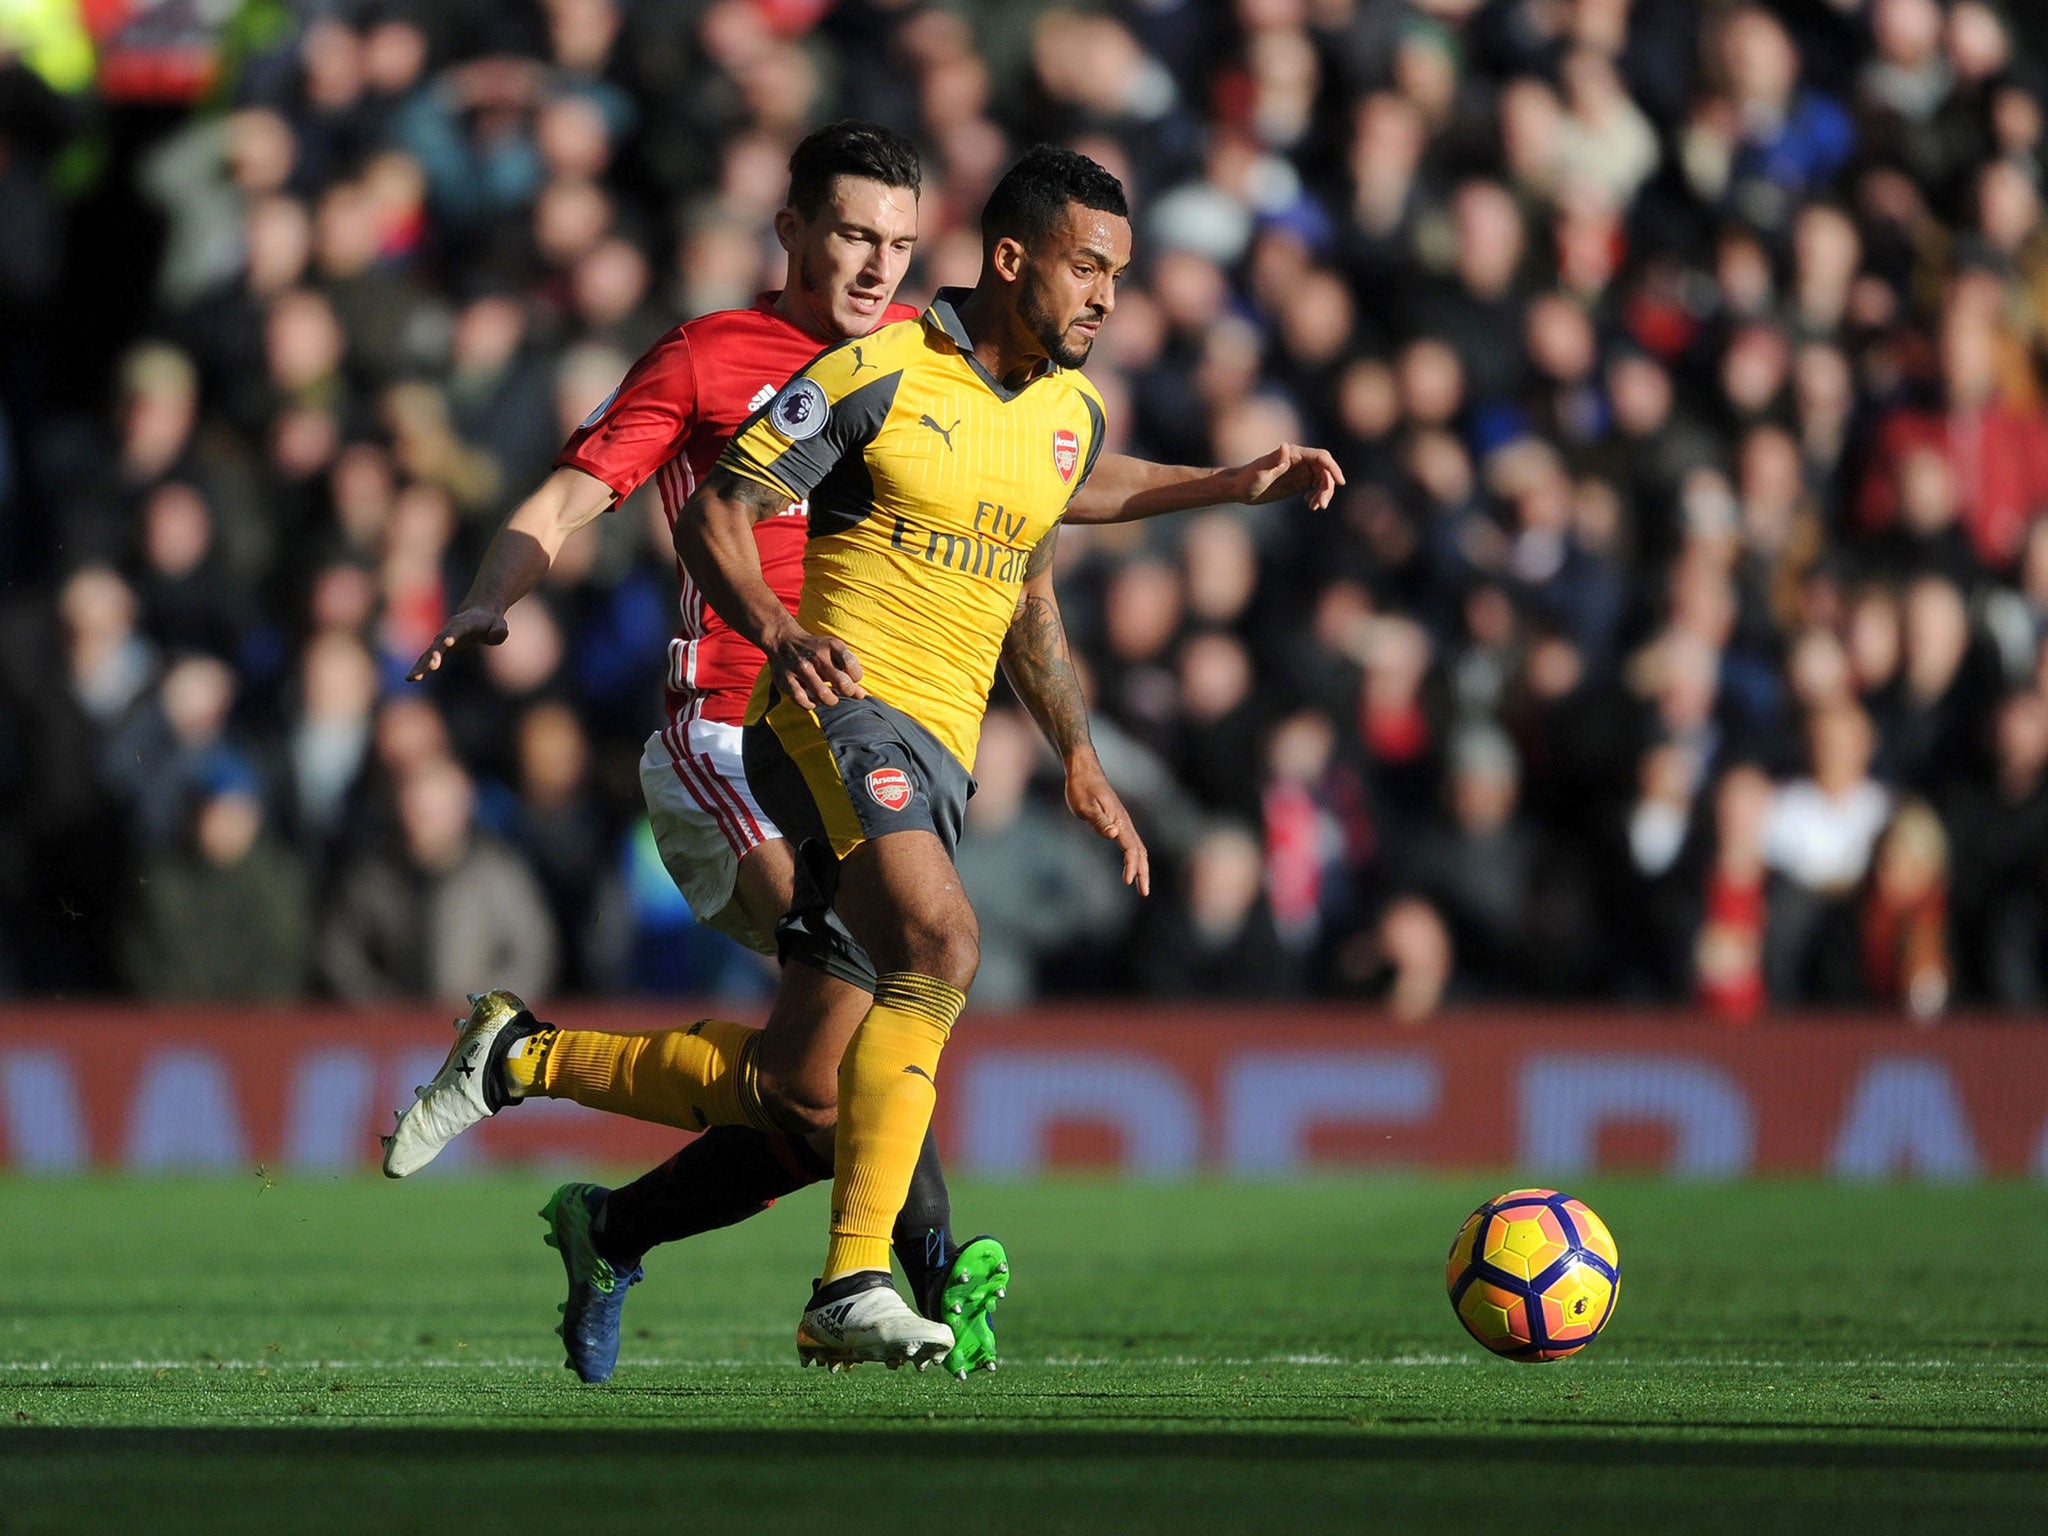 Theo Walcott looked quiet at Old Trafford but had the courage to admit he was at fault for the first goal